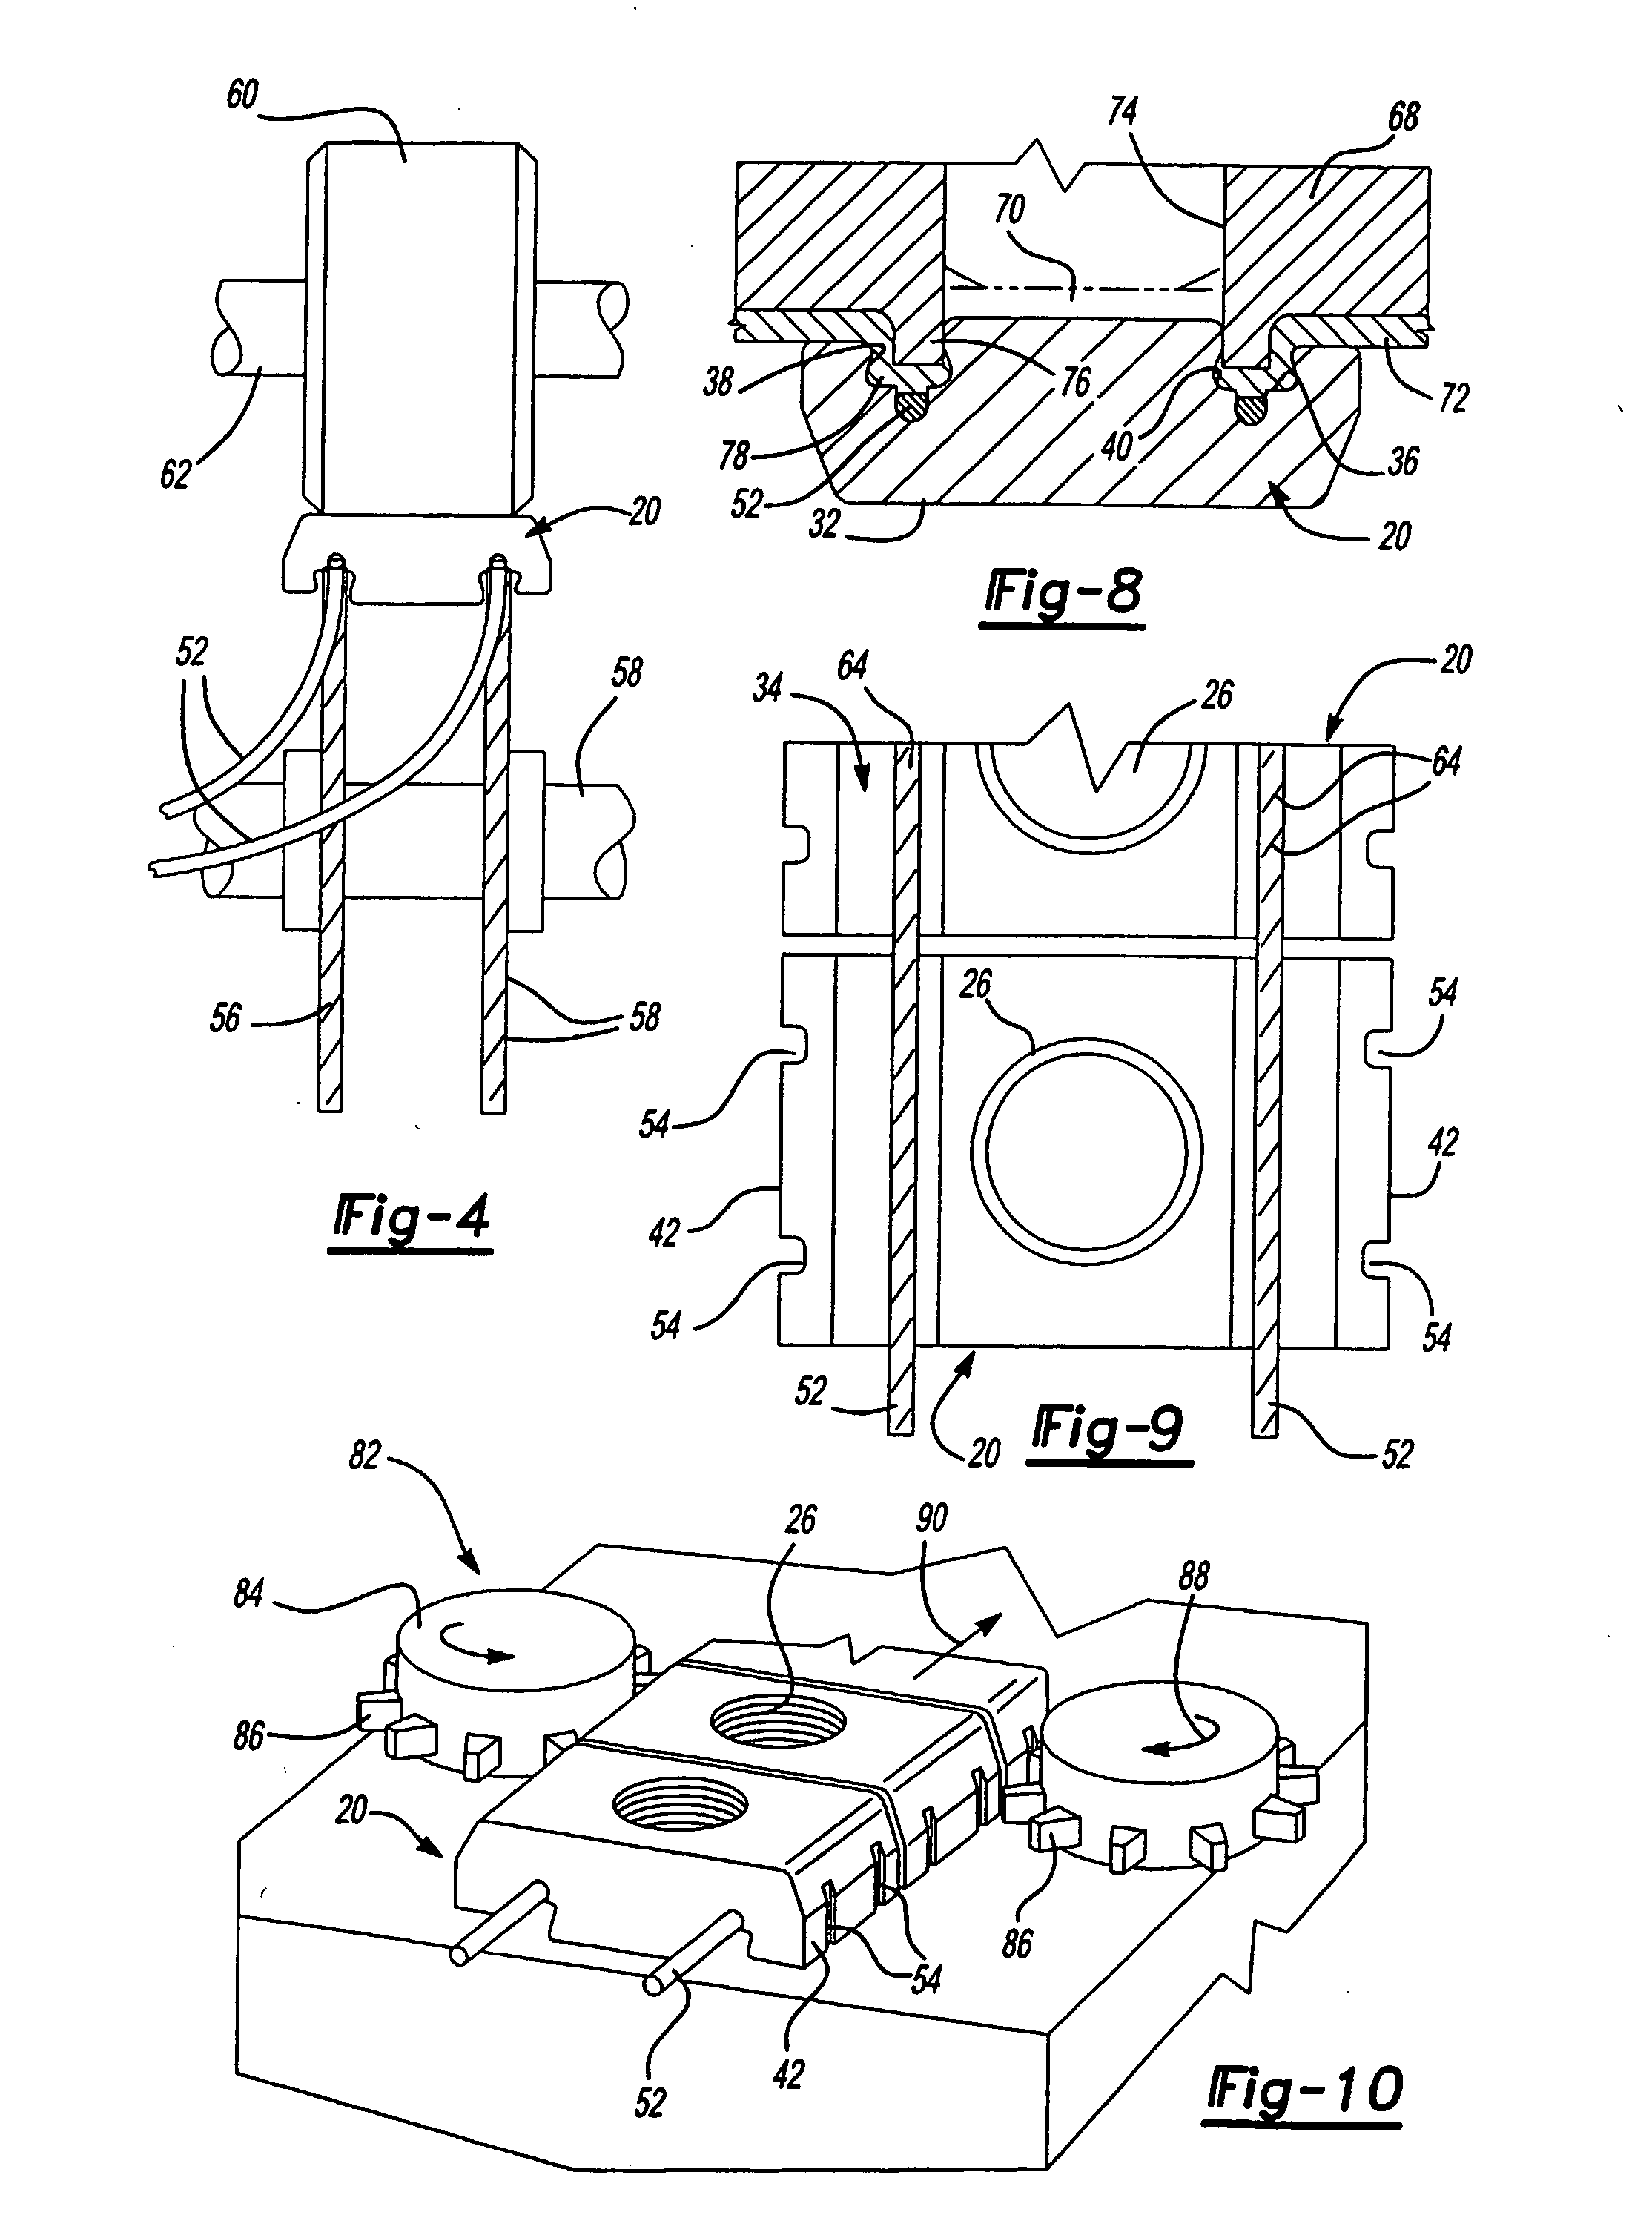 Self-attaching fastener systems